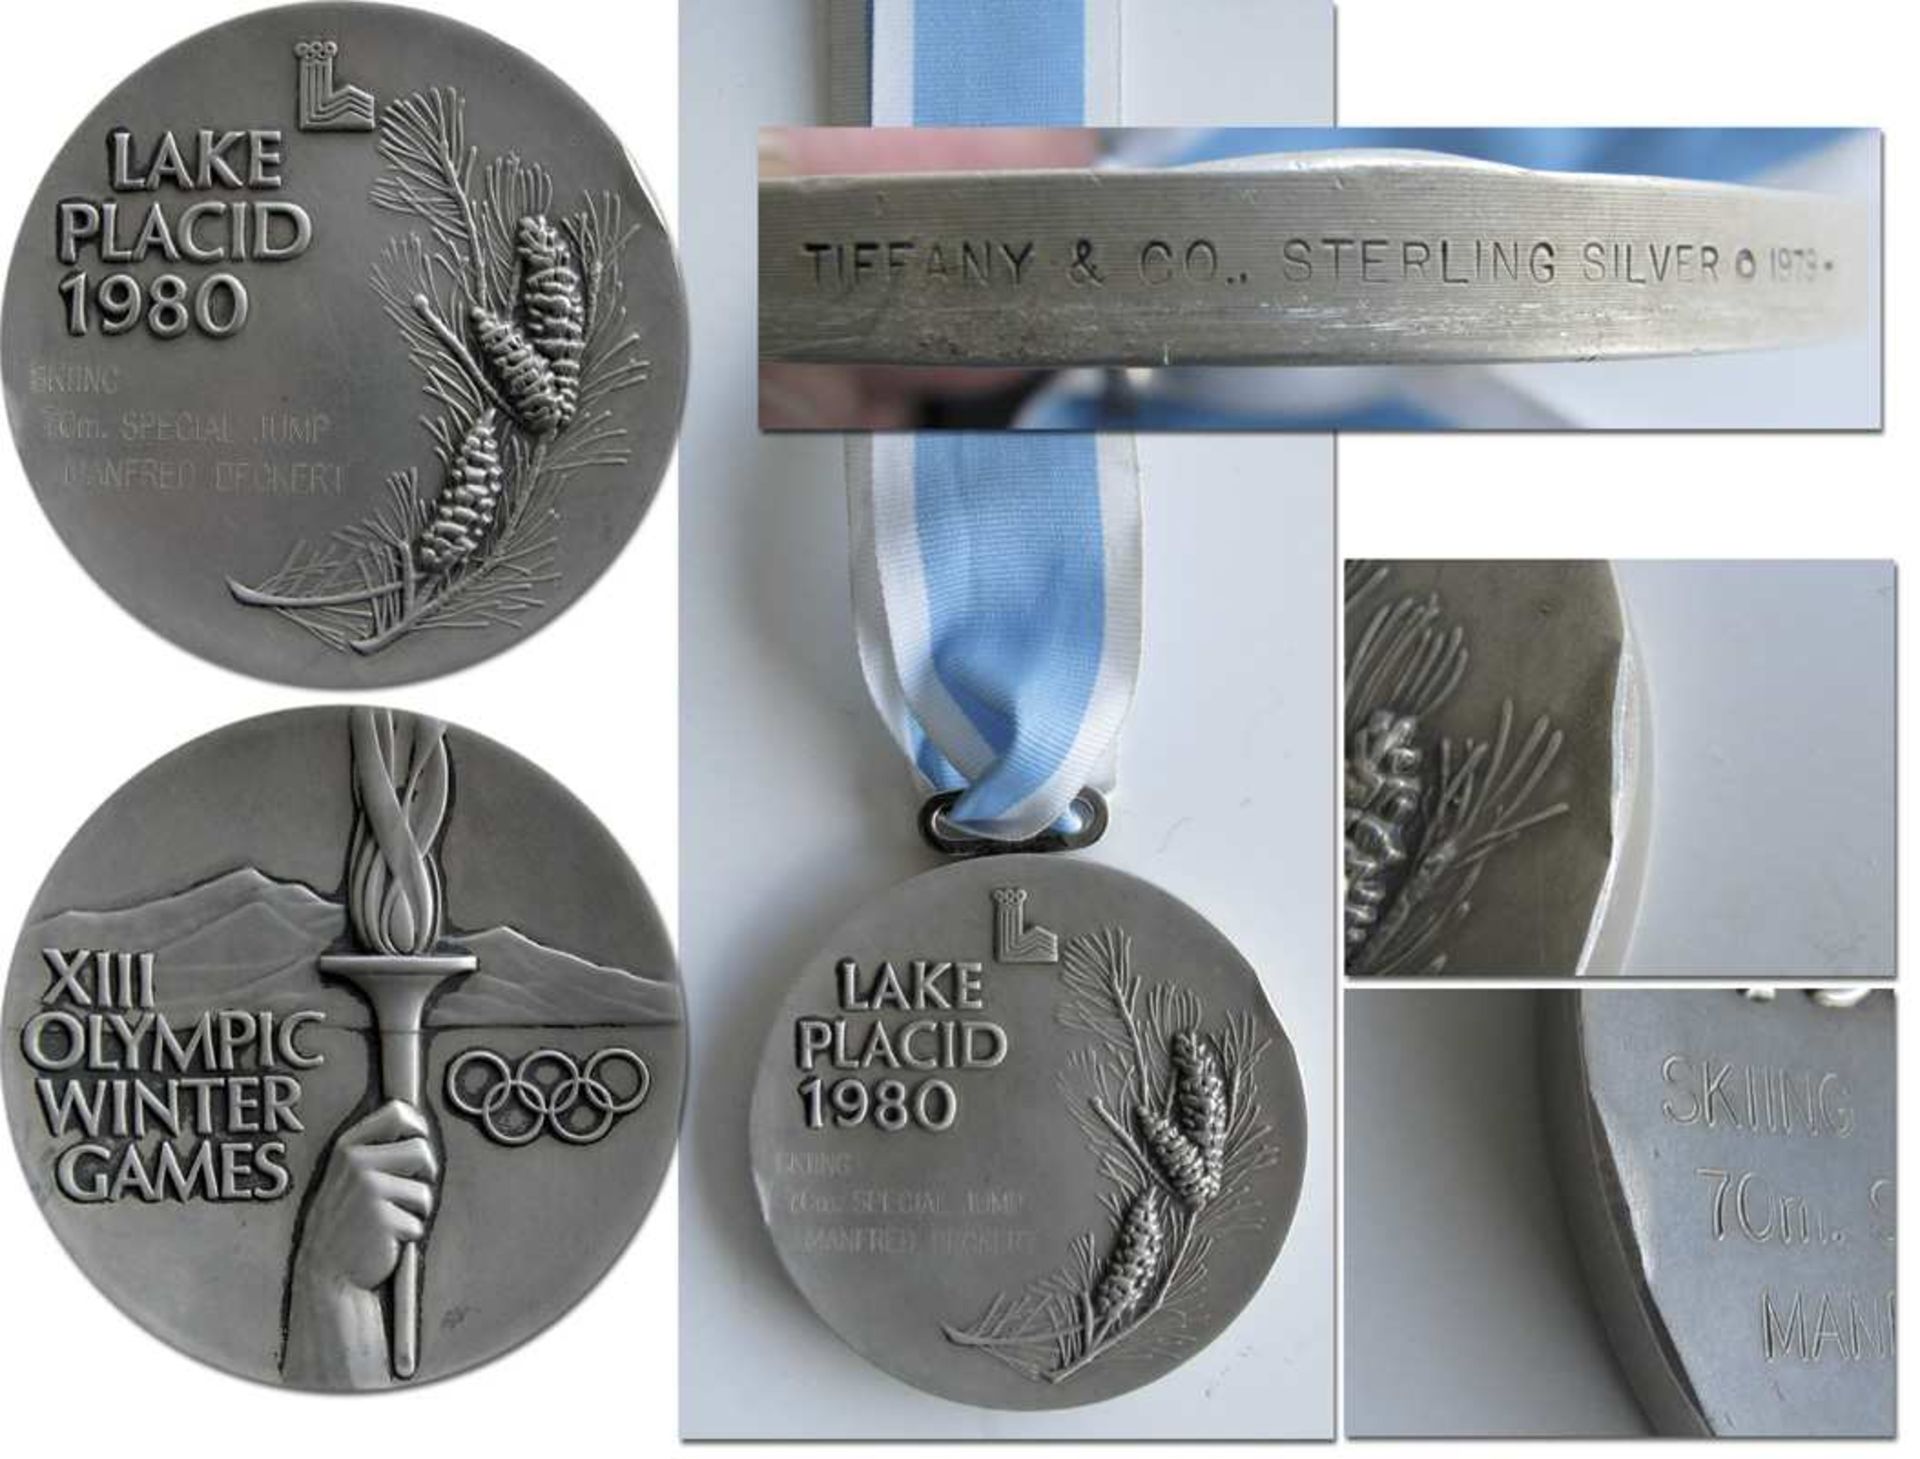 Olympic Games Lake Placid 1980. Winner's Medal - Winner medal ski jumping for the second place at